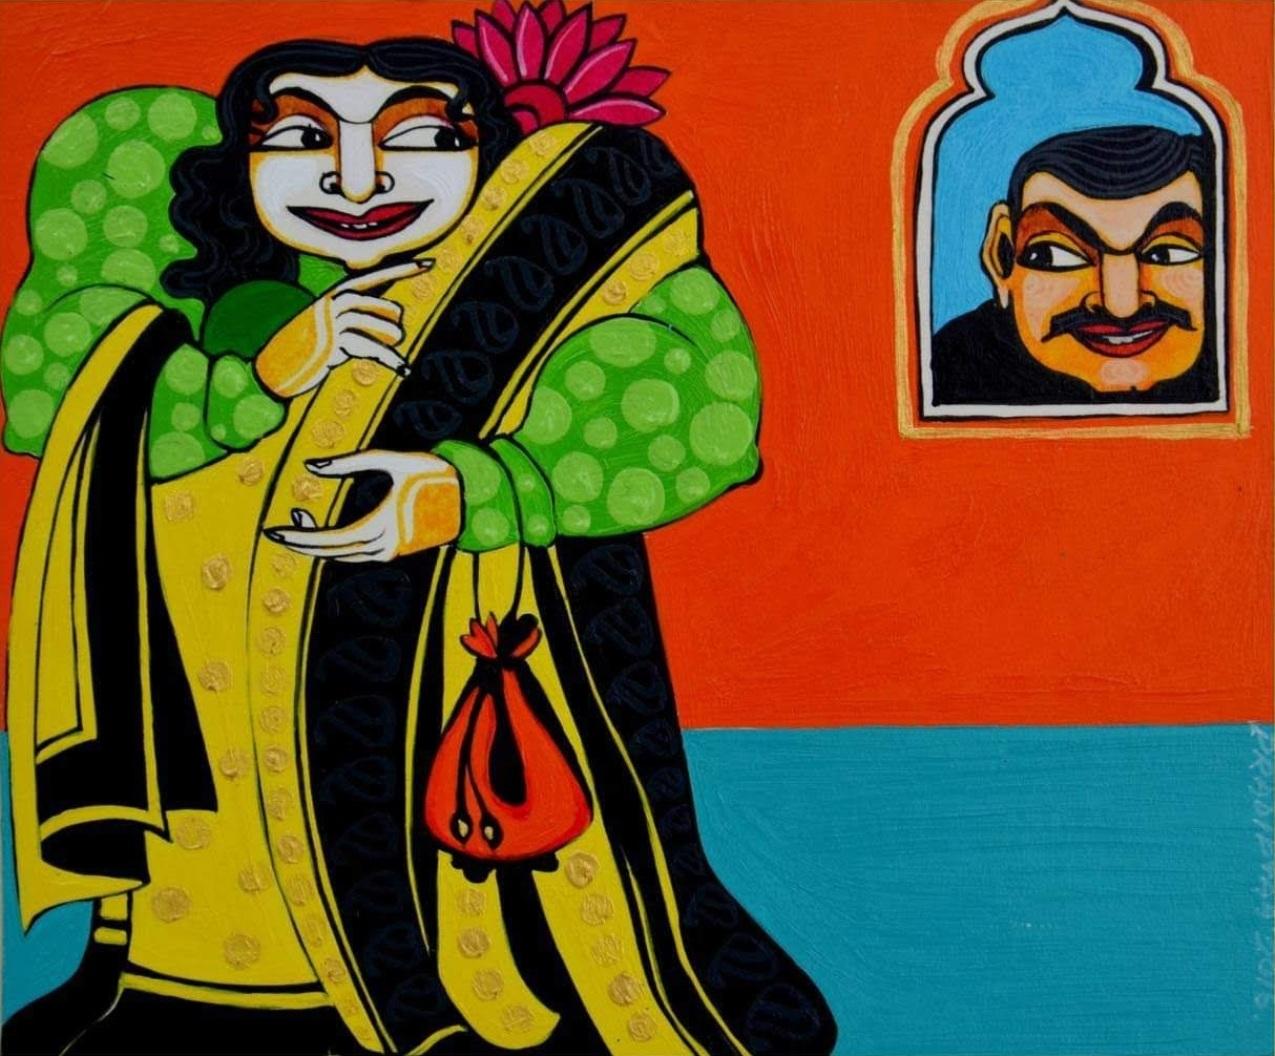 The Yellow Paradox of Love, Acrylic on Canson Board by Indian Artist "In Stock"